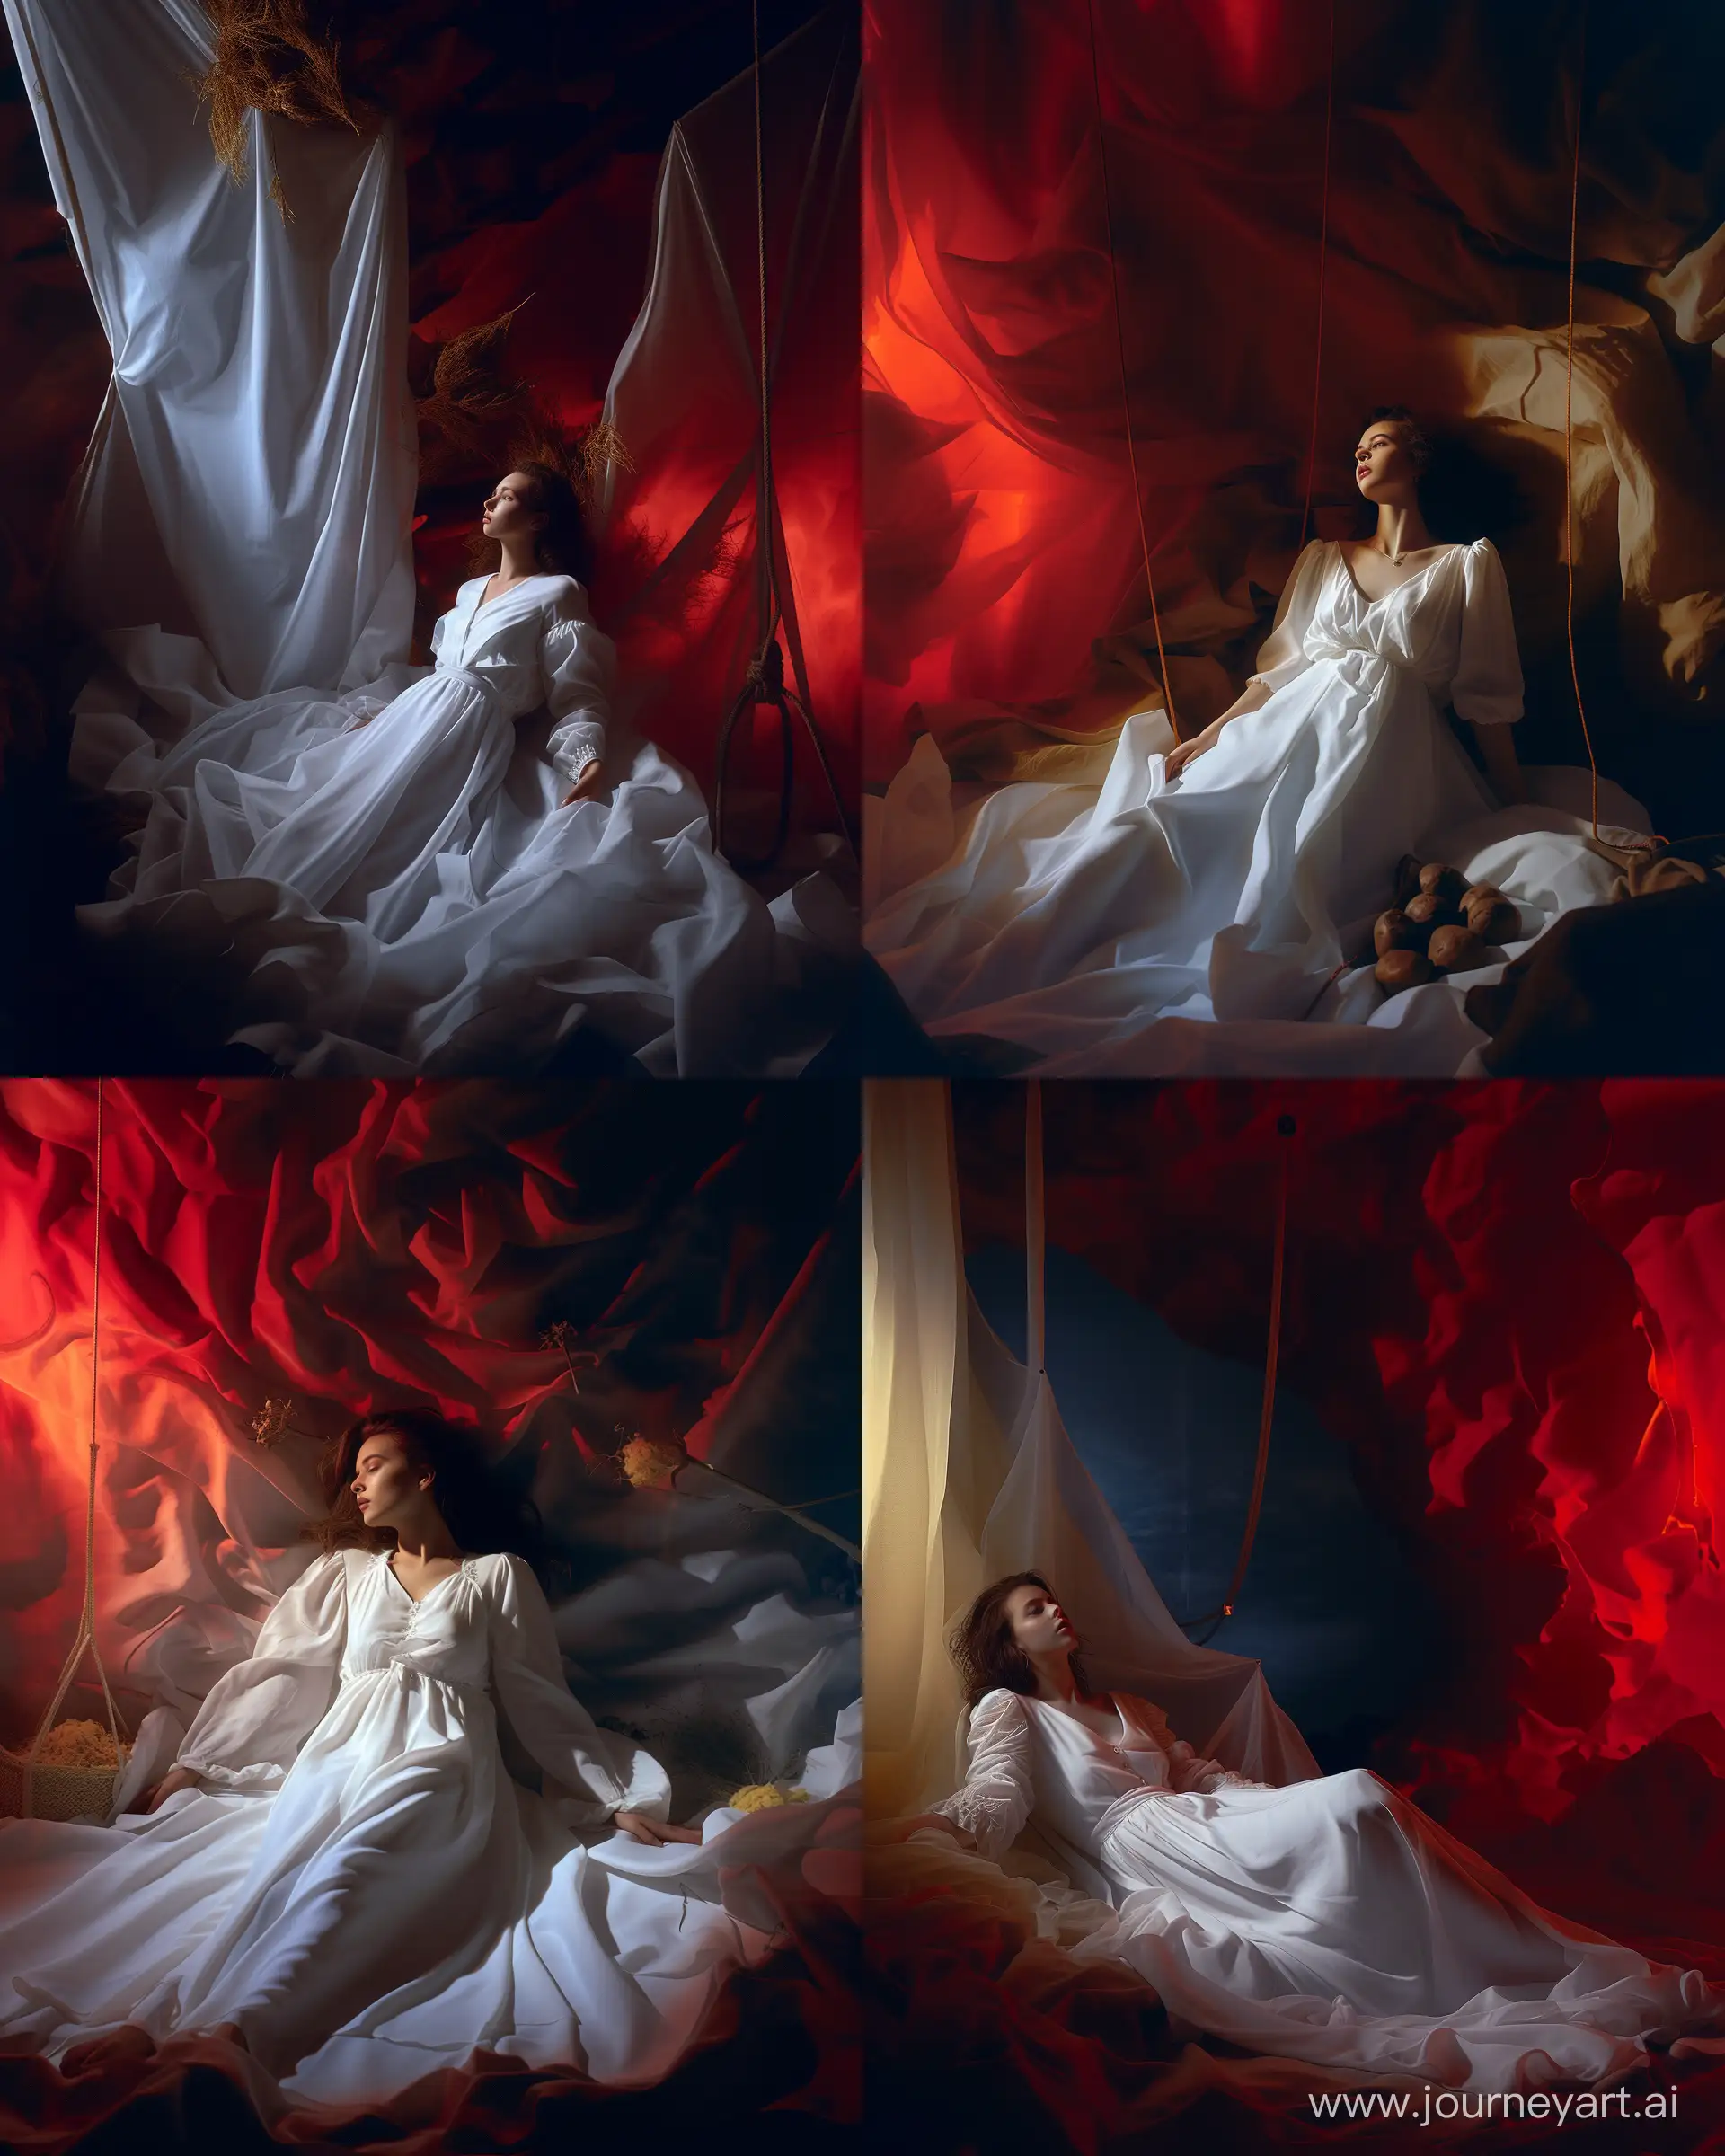 https://i.postimg.cc/PqBMNnT3/staged-photography-of-dorothea-tanning-abstract-atmosphere-dark-surrealistic-and-poeticald.png , A girl lying in a long white dress in an abstract space, surrealistic, dark red lighting --ar 4:5